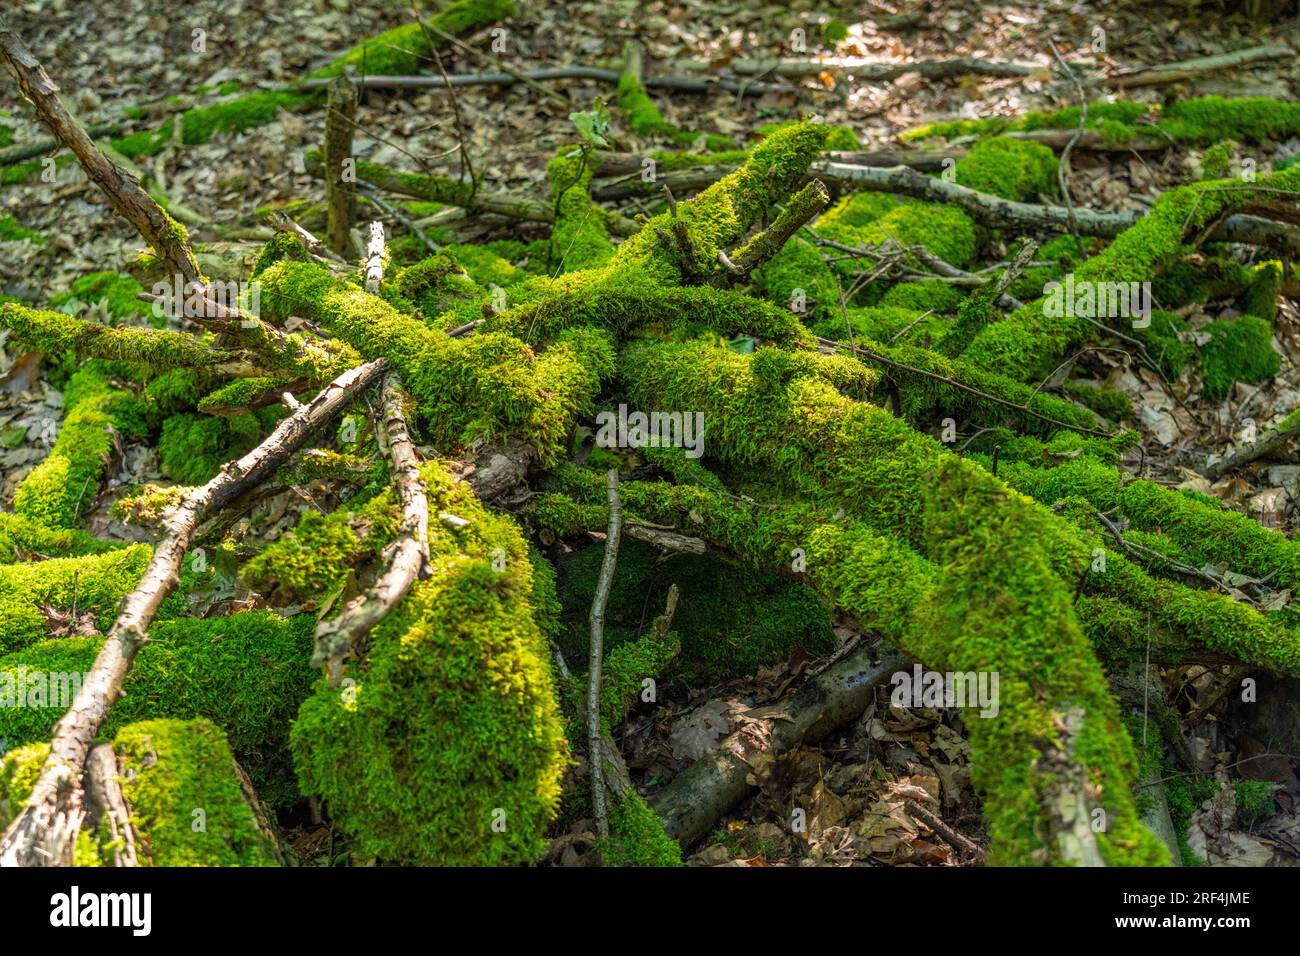 The Duisburg city forest, a forest area of approx. 600 ha in the south-east of Duisburg, mossy branches, NRW, Germany, Stock Photo